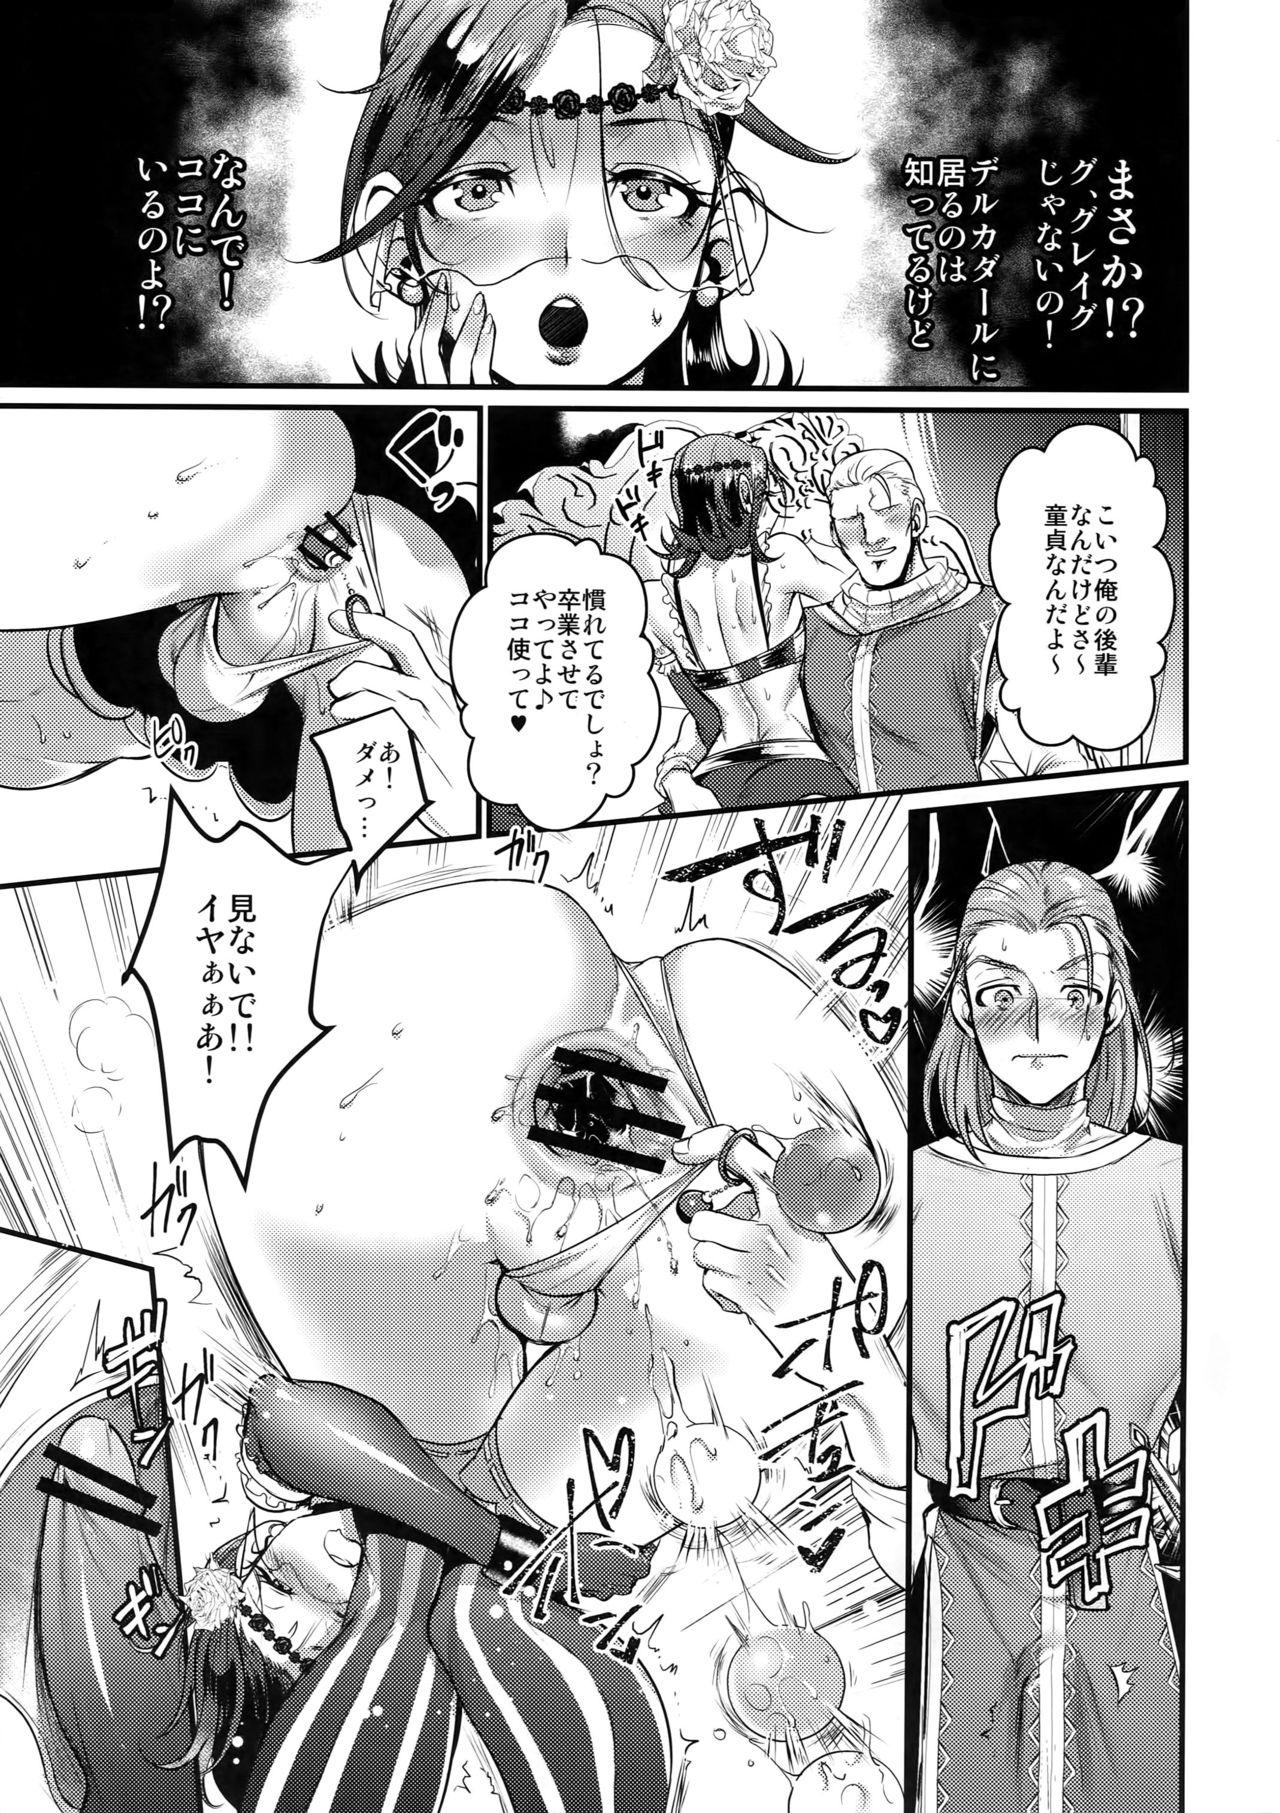 Assfingering Kiss Me Deadly - Dragon quest xi Wanking - Page 10